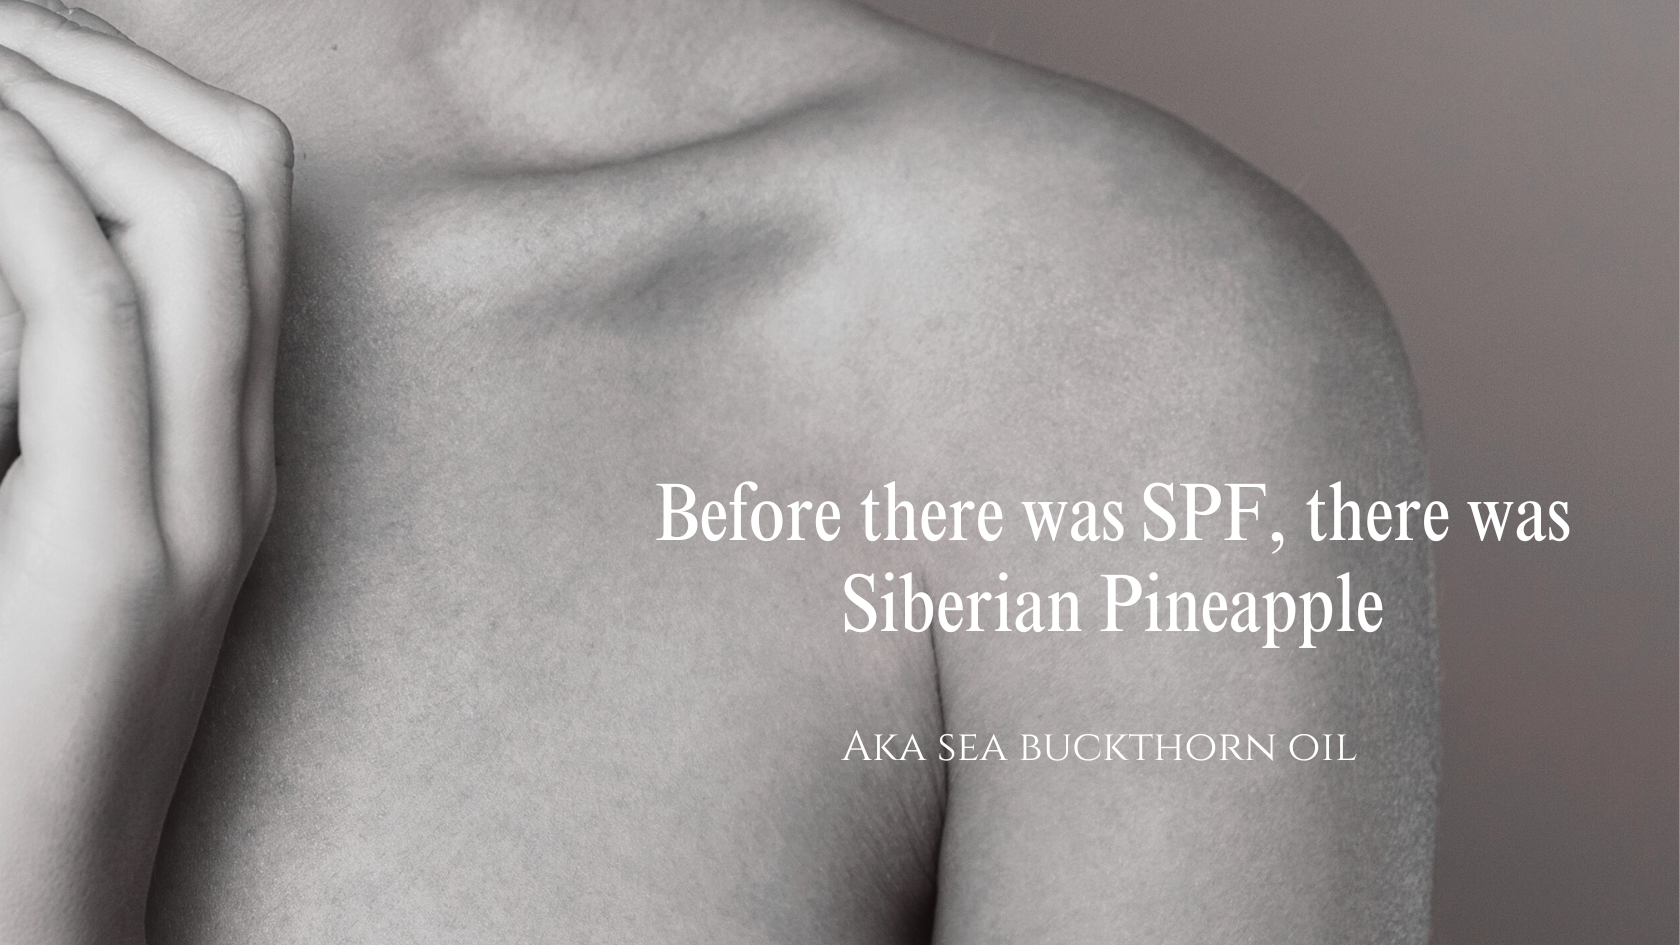 Before there was SPF, there was Siberian Pineapple